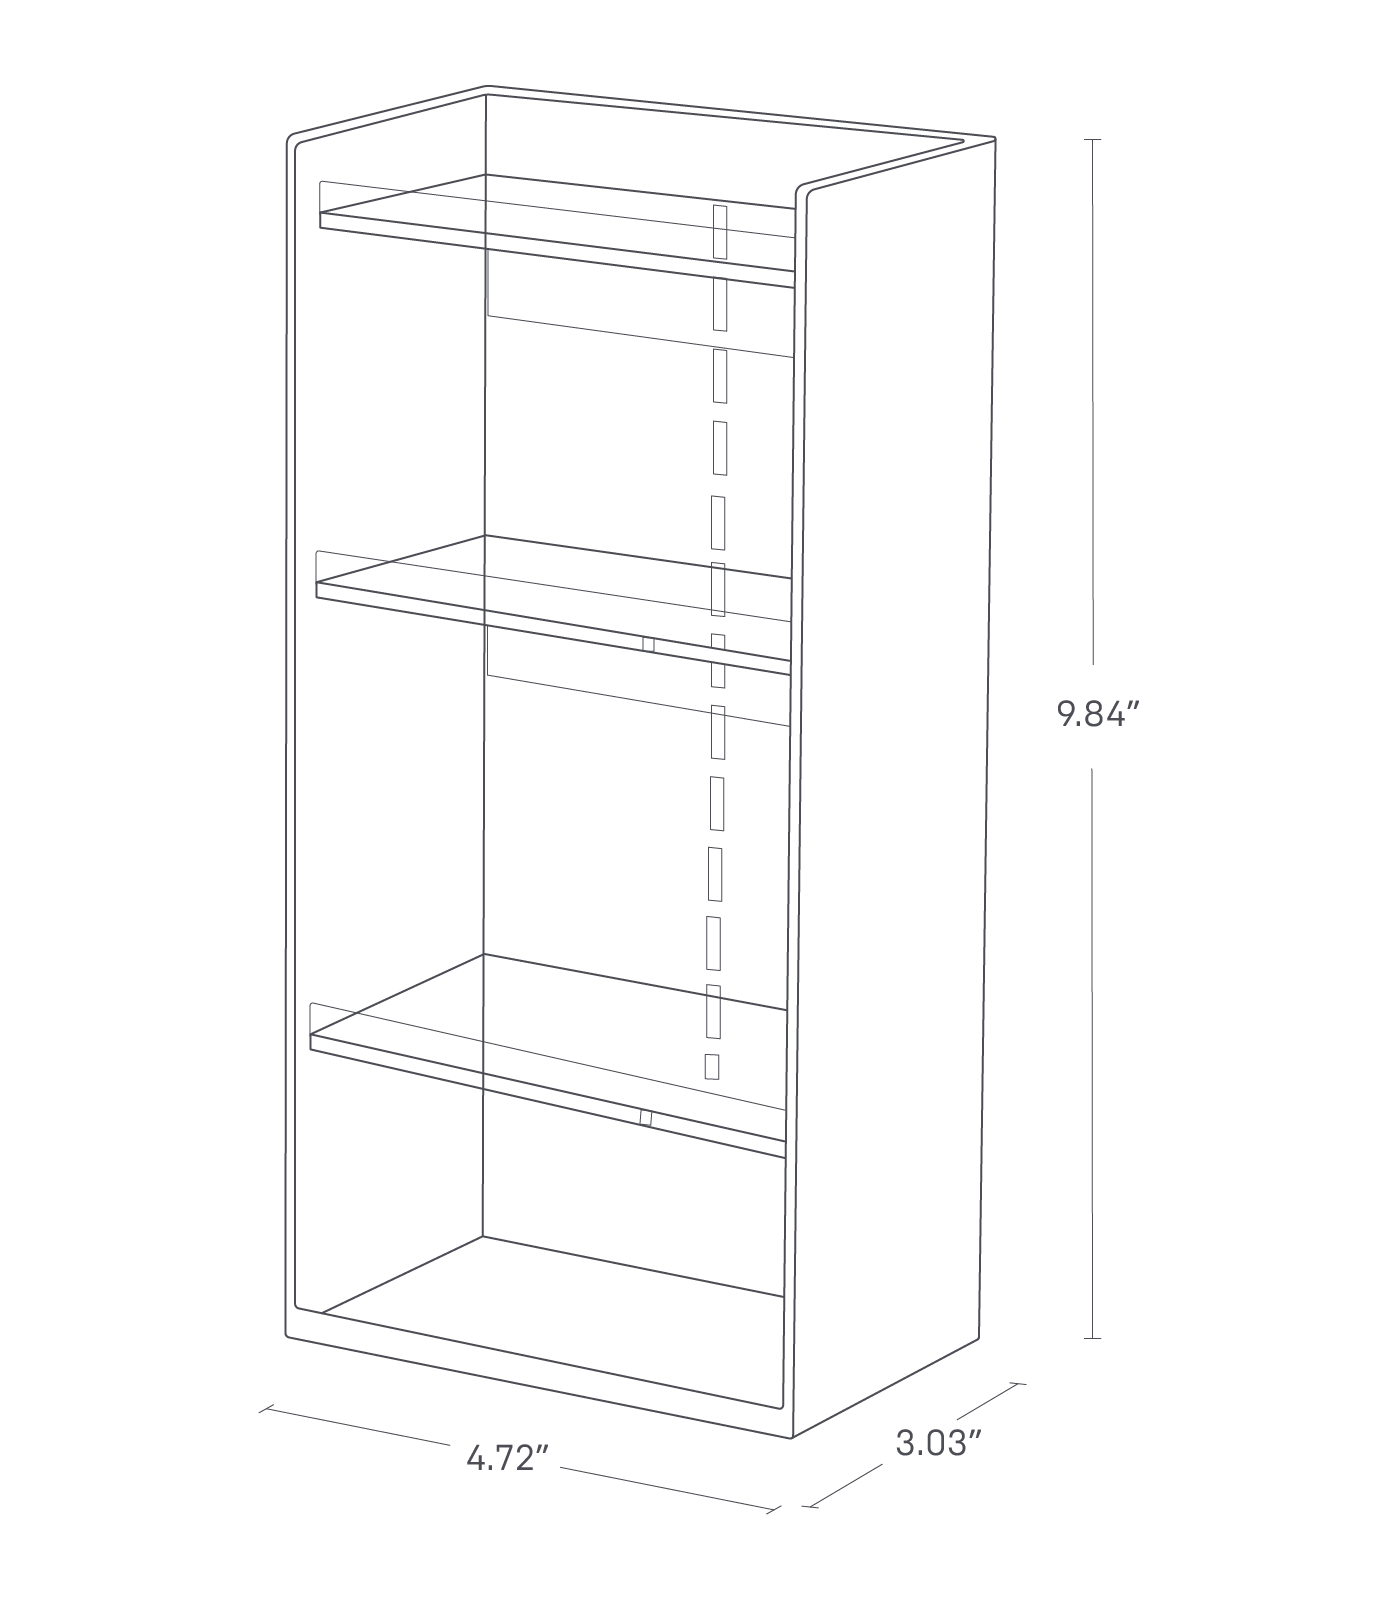 Dimension image for Makeup Organizer - Flat showing a length of 4.72